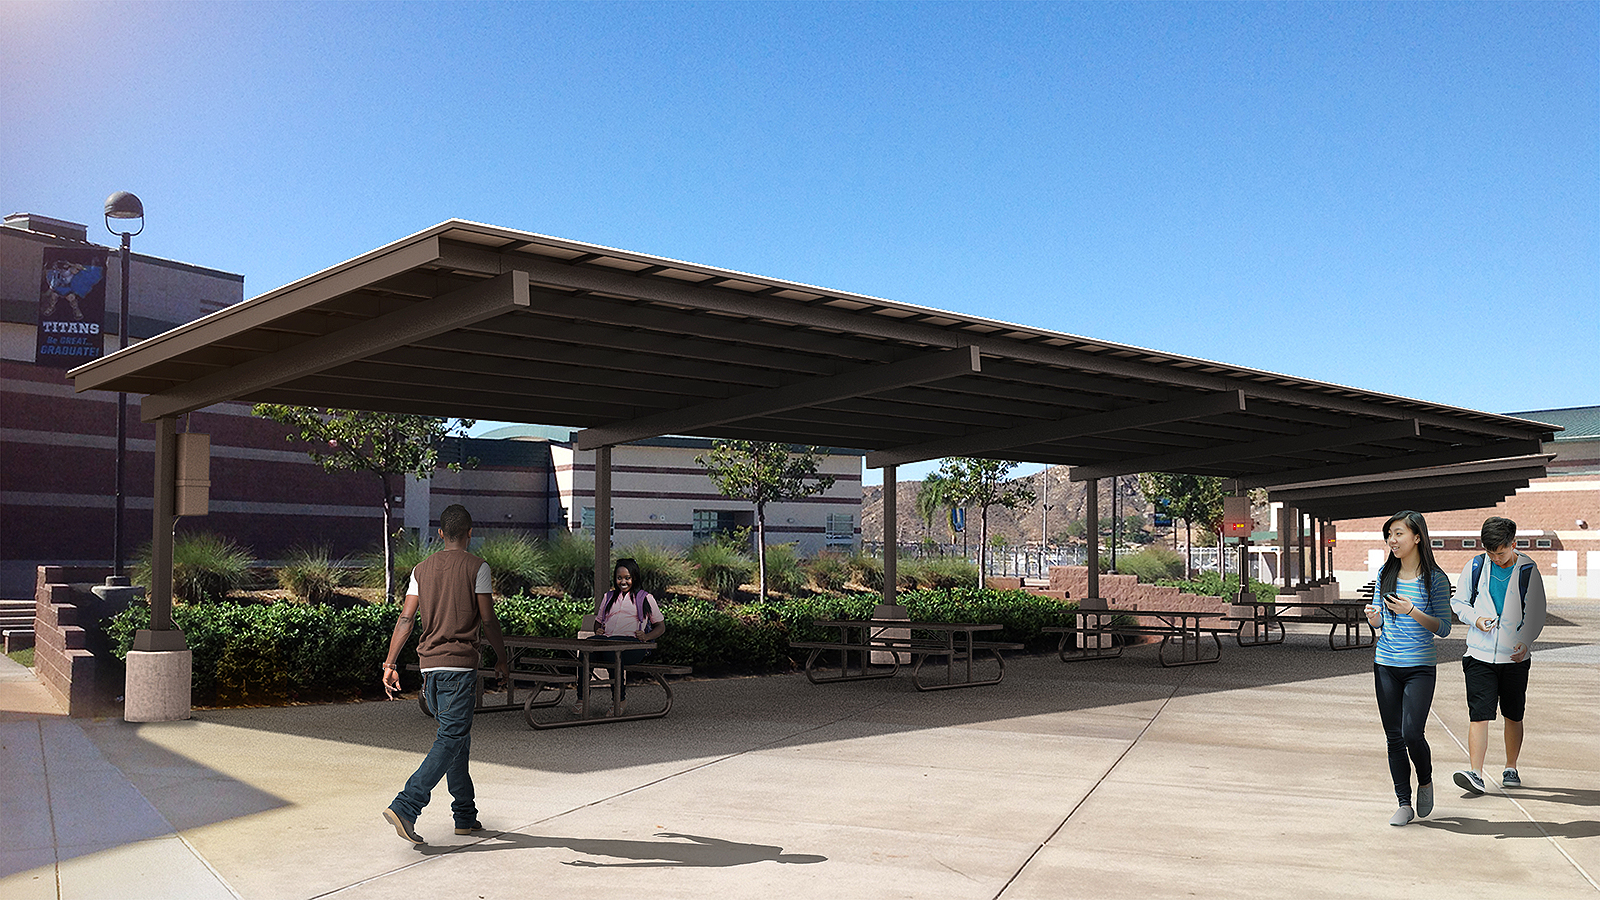 Solar energy structures to help CJUSD save $35 million in energy costs